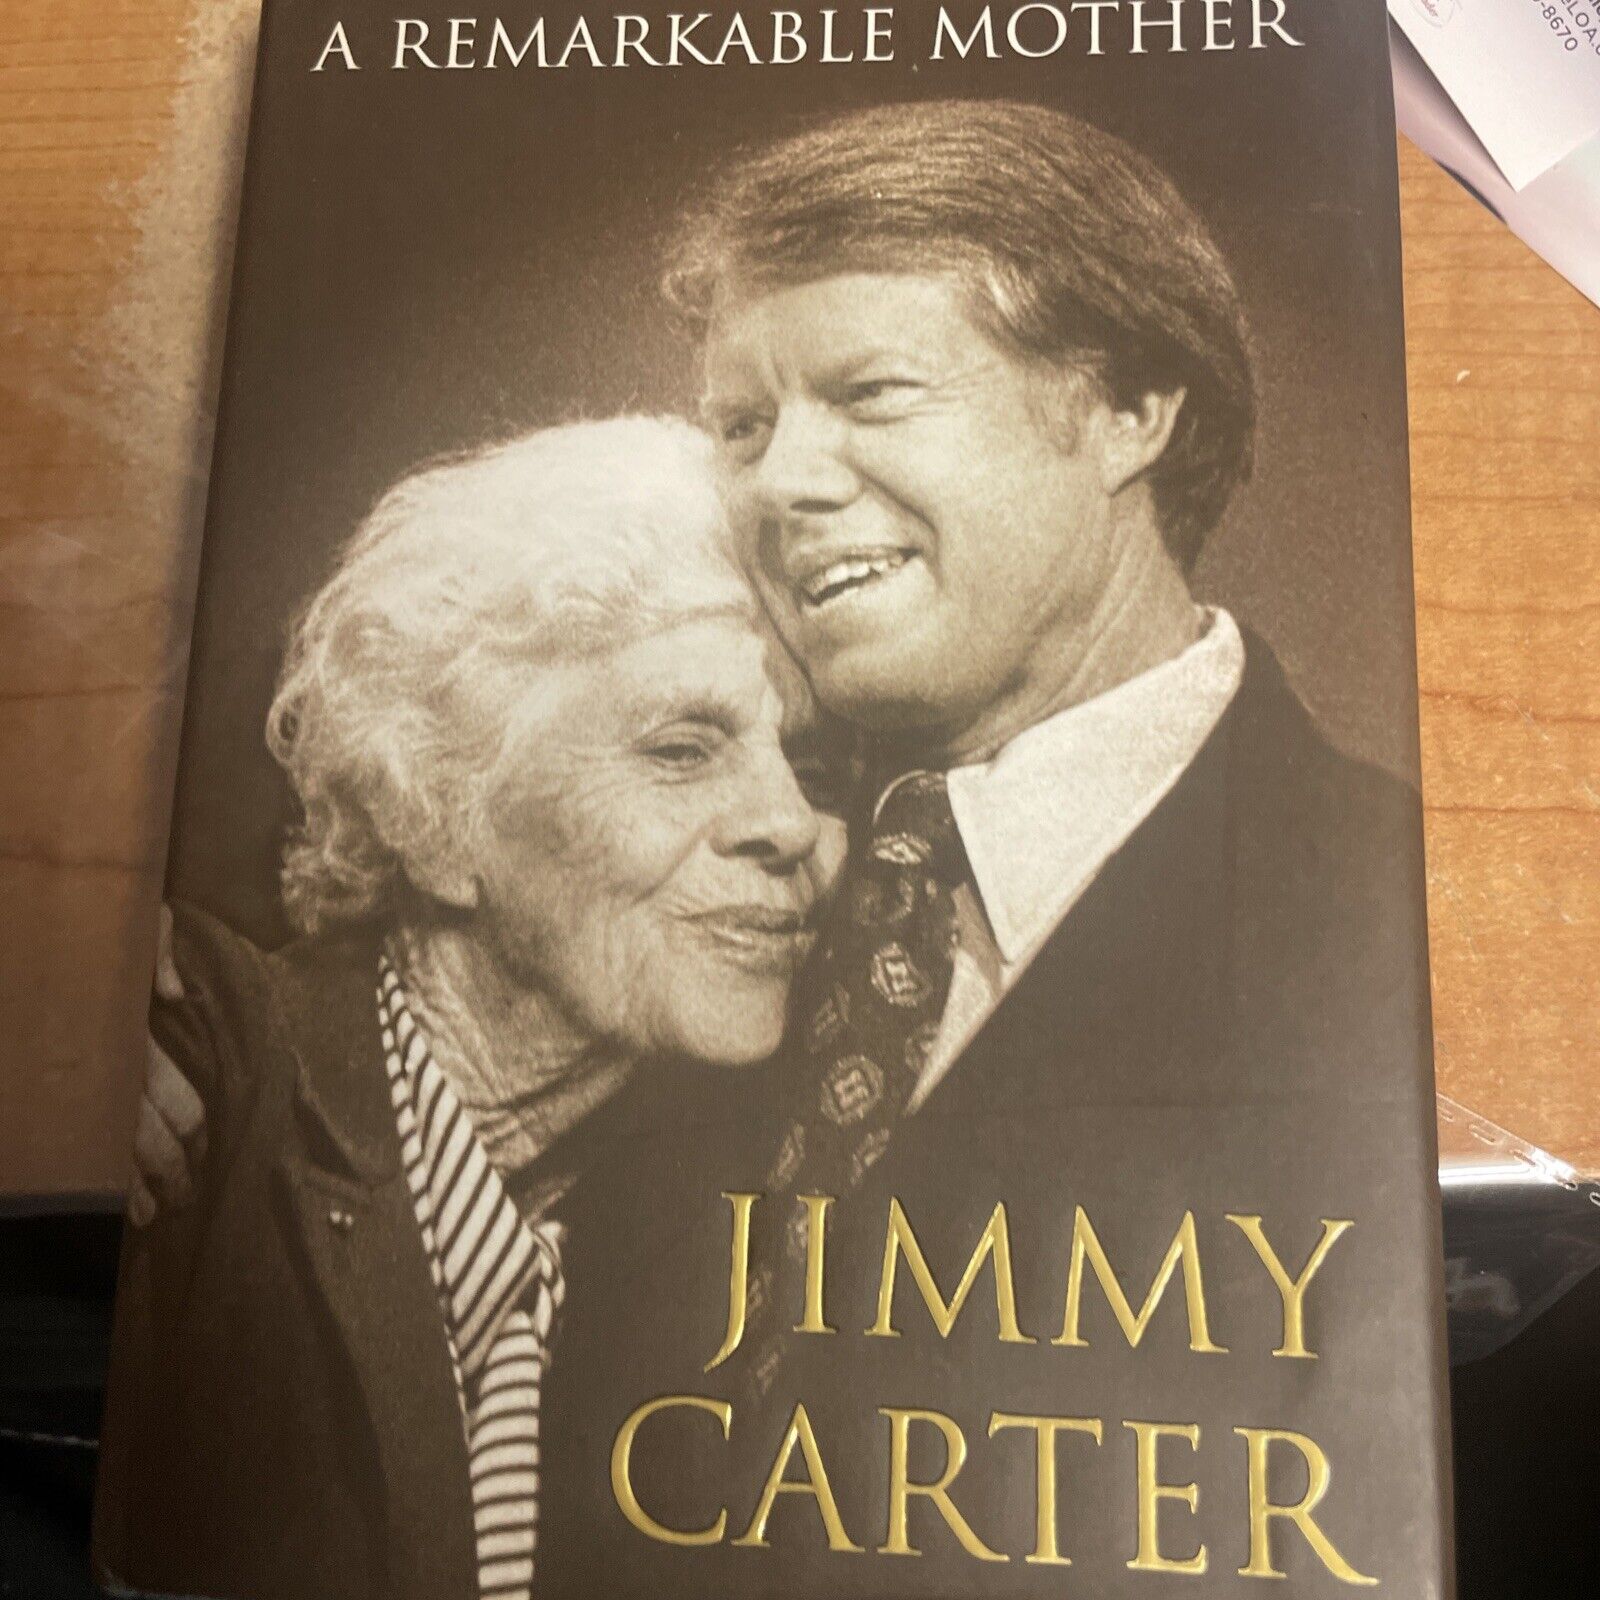 JIMMY CARTER PRESIDENT SIGNED BOOK A REMARKABLE MOTHER JSA COA AND PHOTO